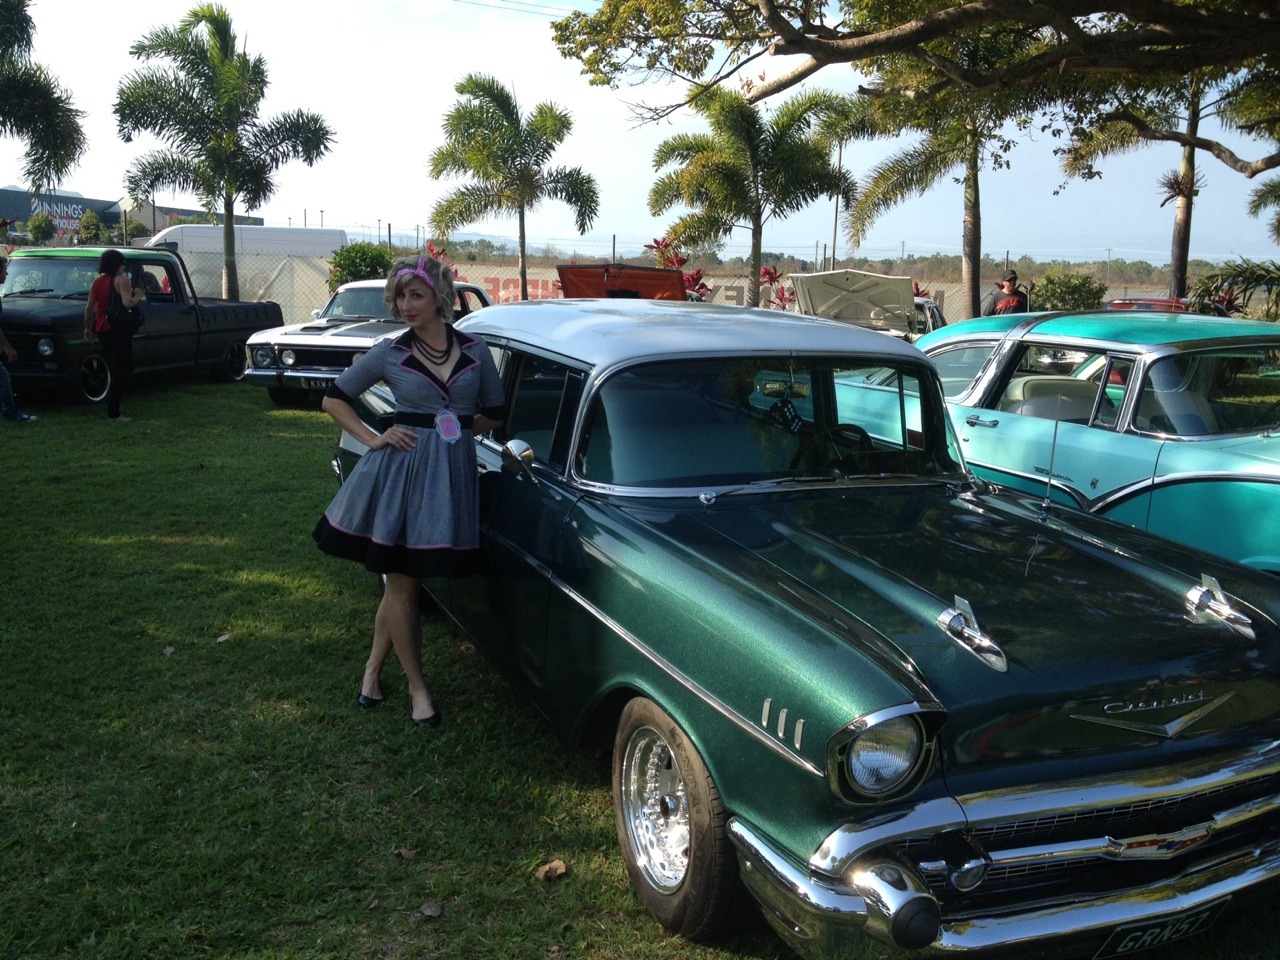 So off to the Rock'n Rods Festival the other weekend. My wife entered into the Retro